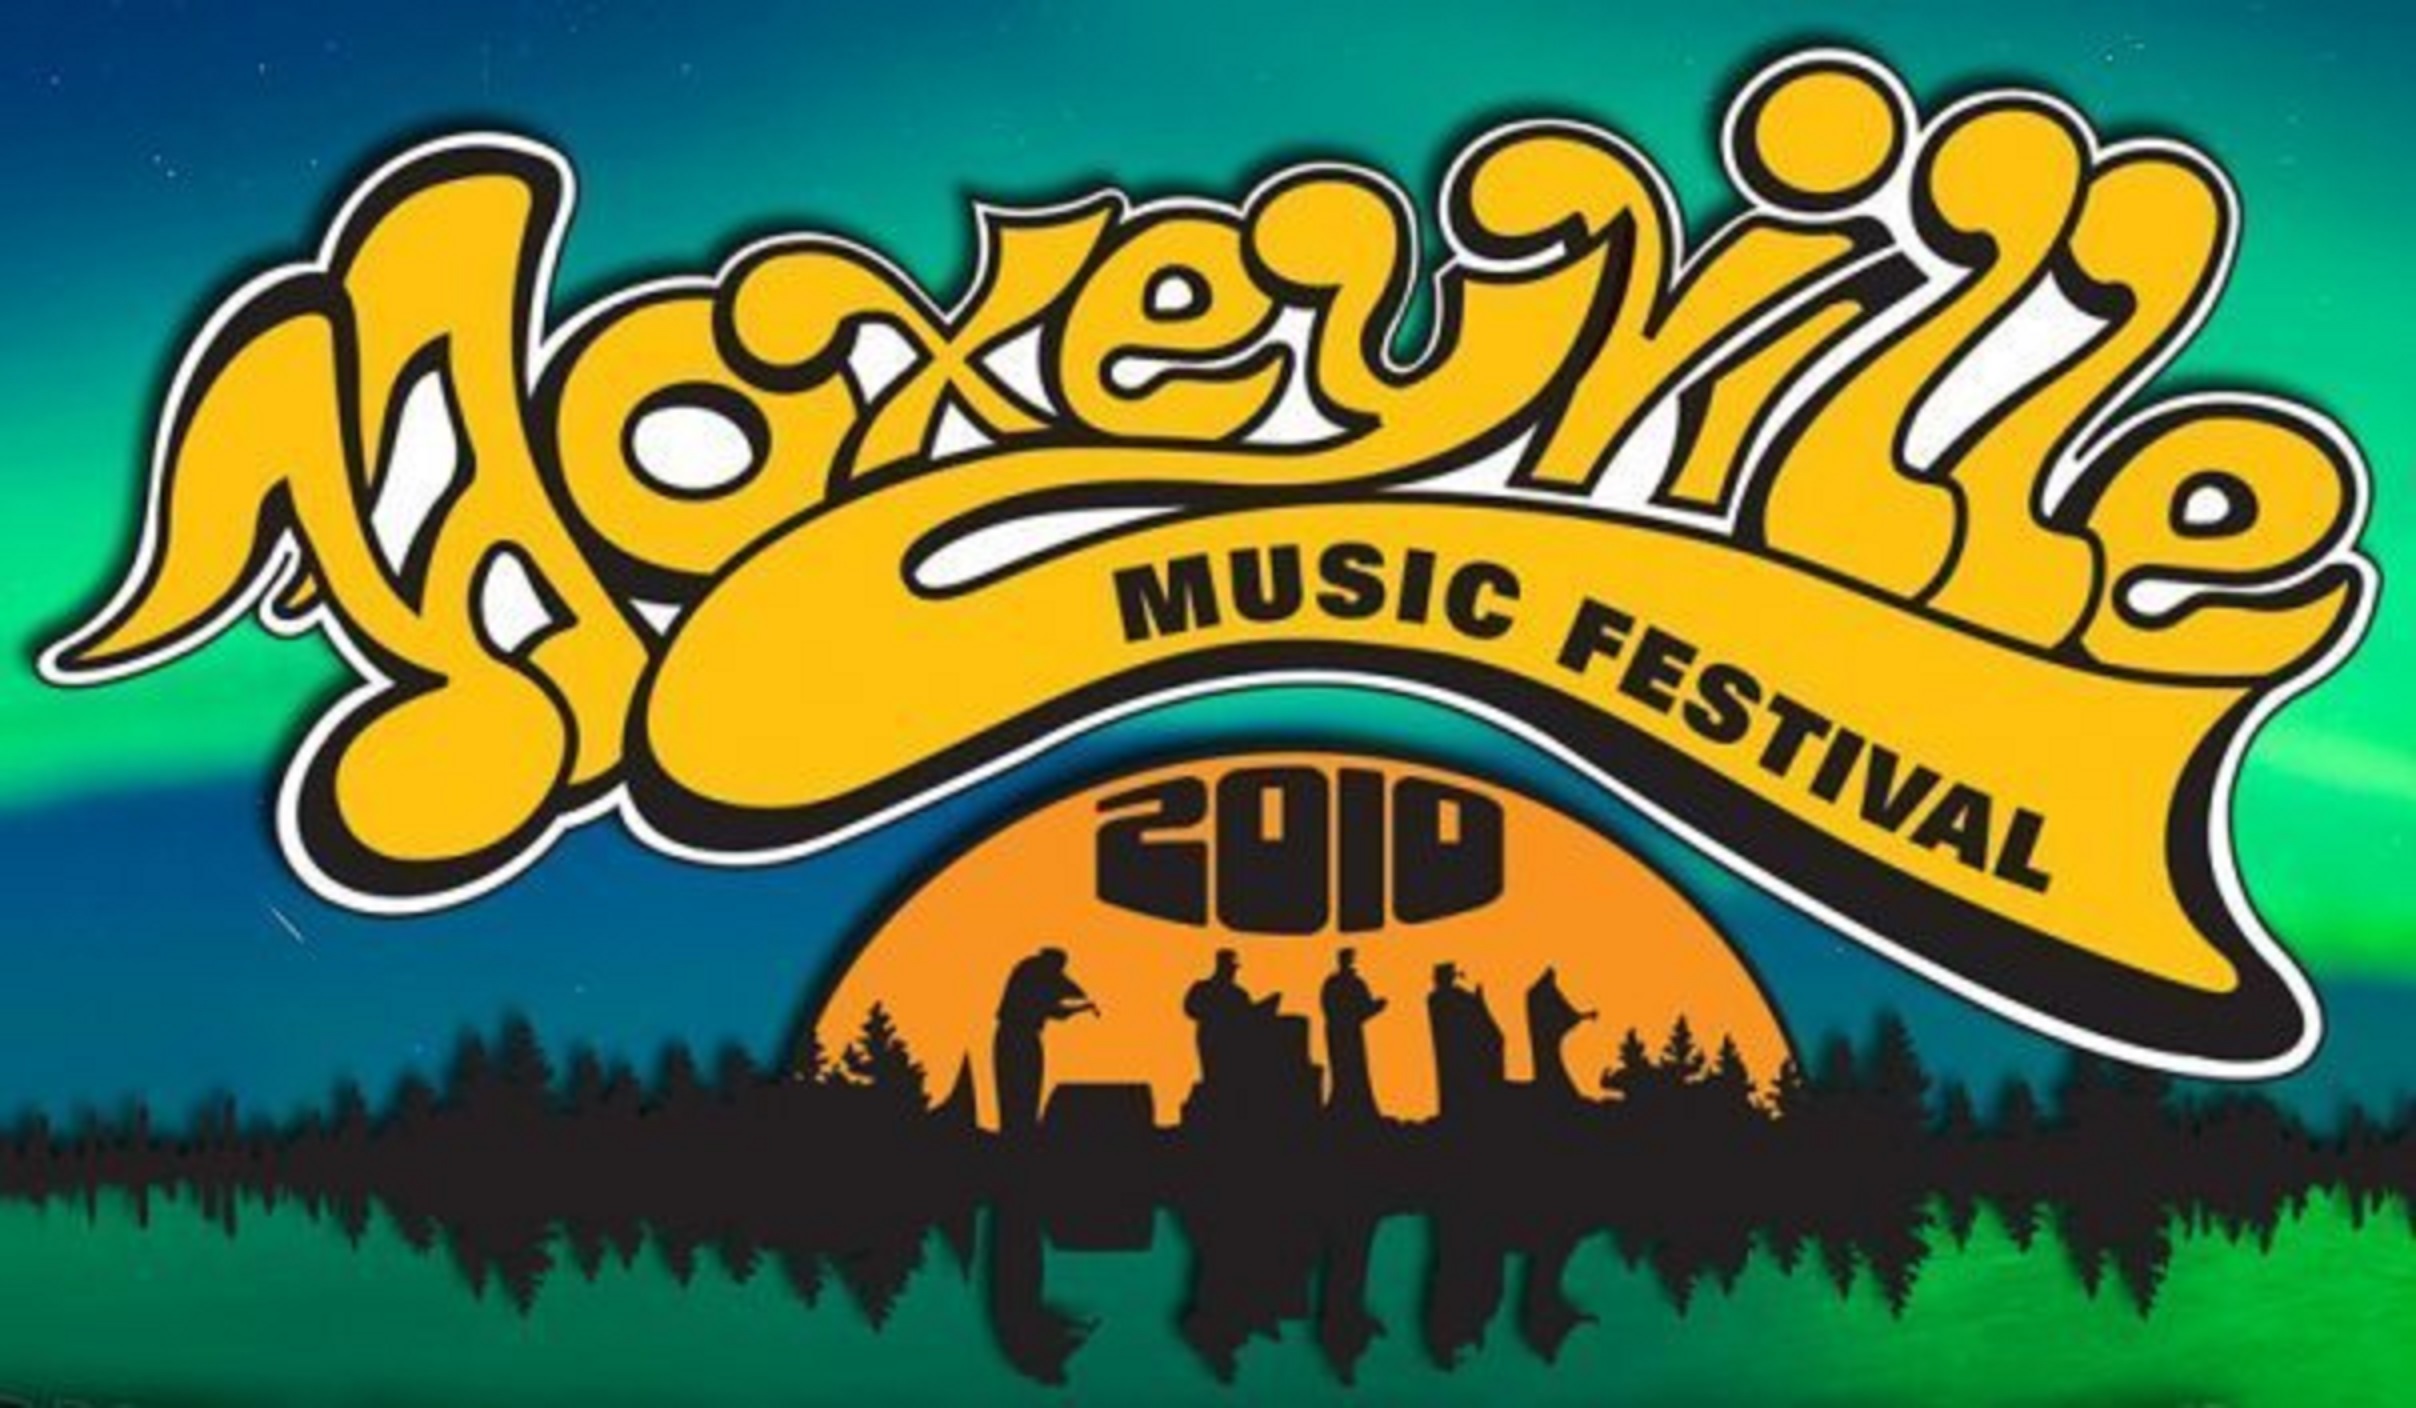 Hoxeyville Music Festival 2010 | Review